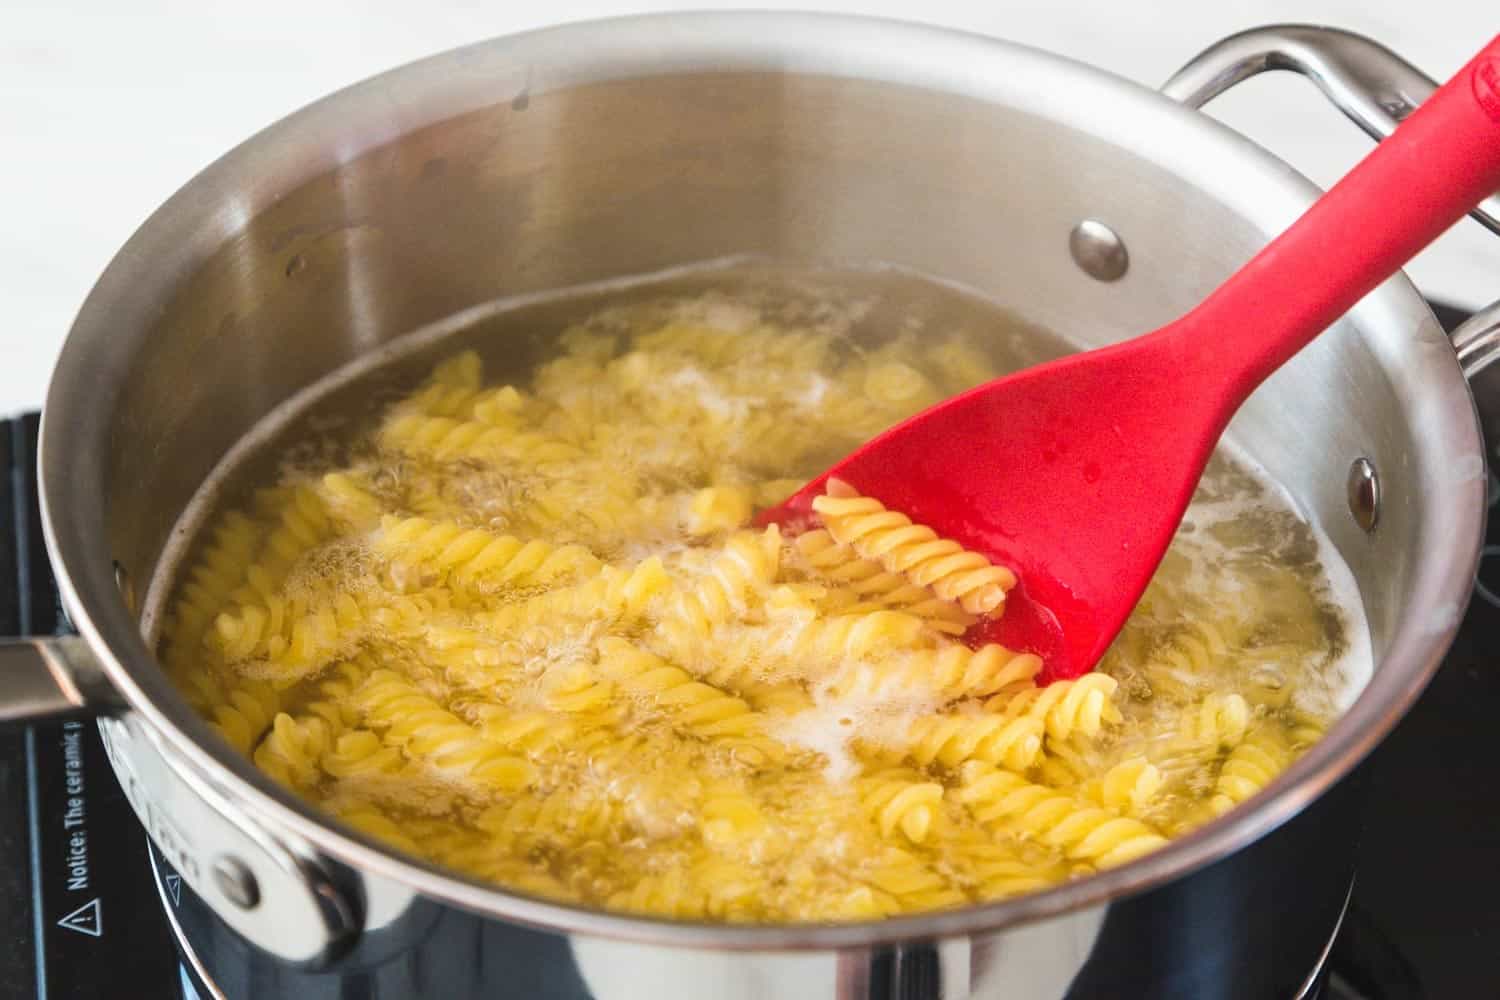 Cooking pasta in a saucepan, and a red spatula stirring the pasta